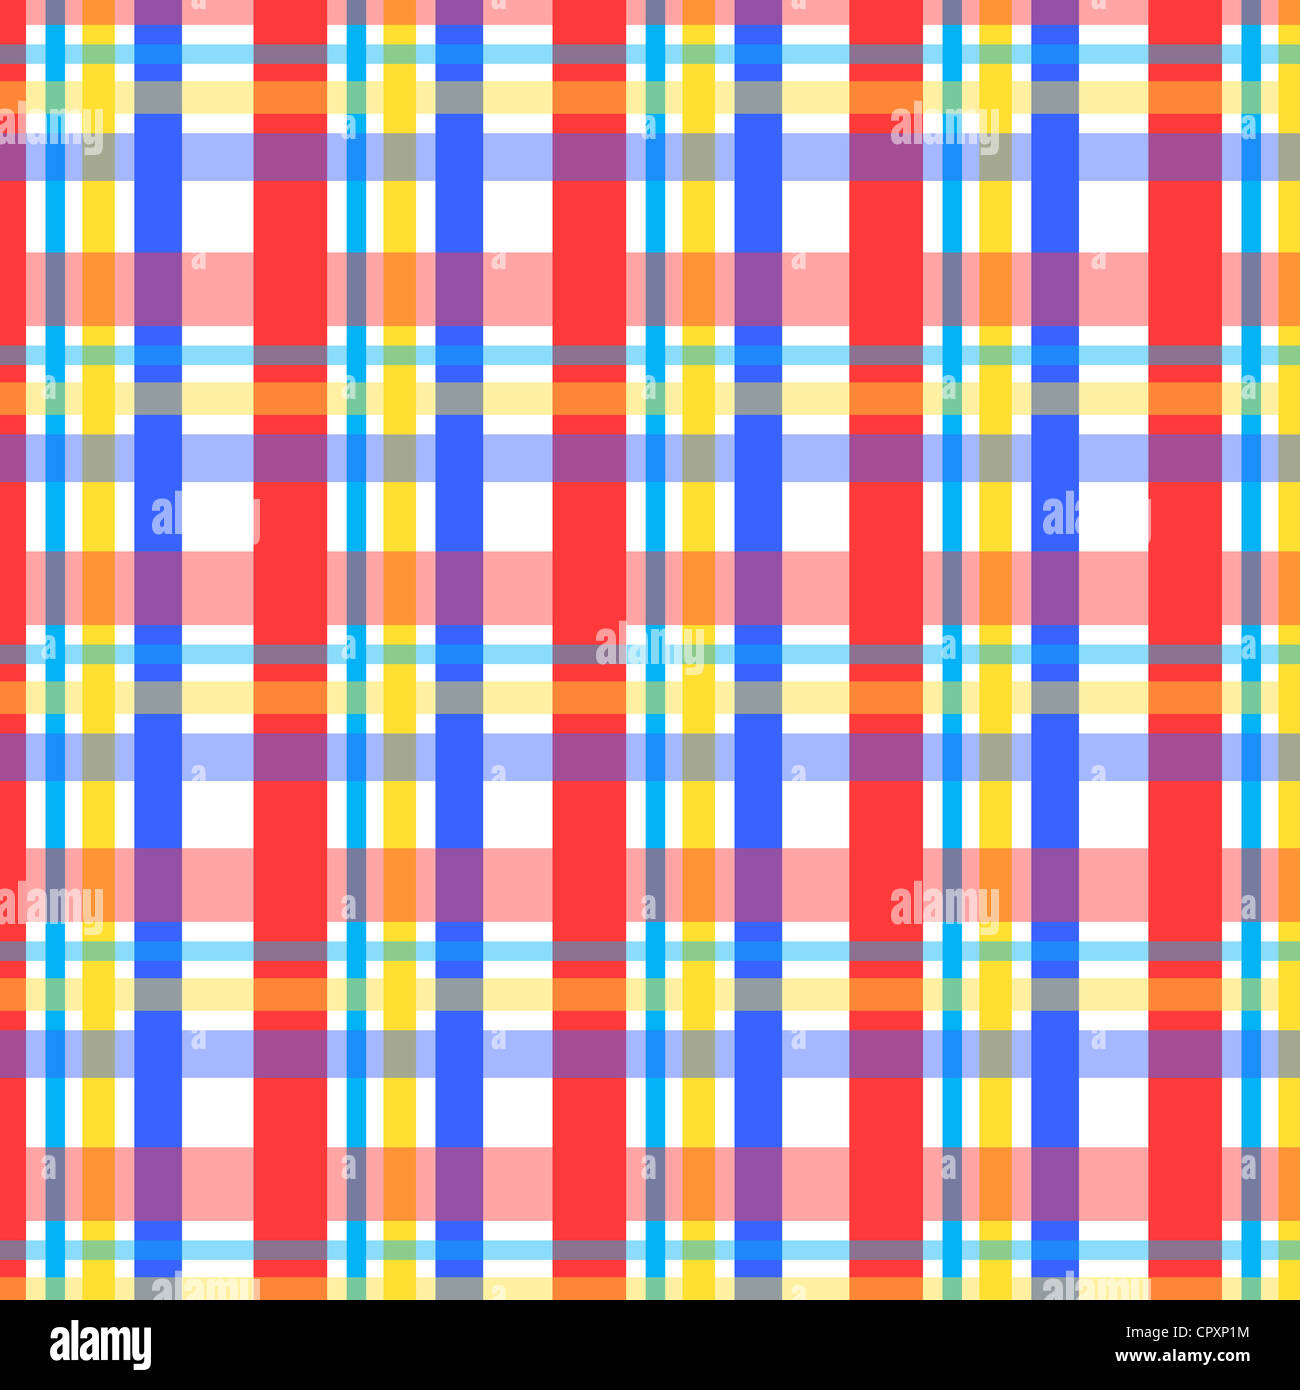 Plaid pattern in red , blue and yellow colors Stock Photo